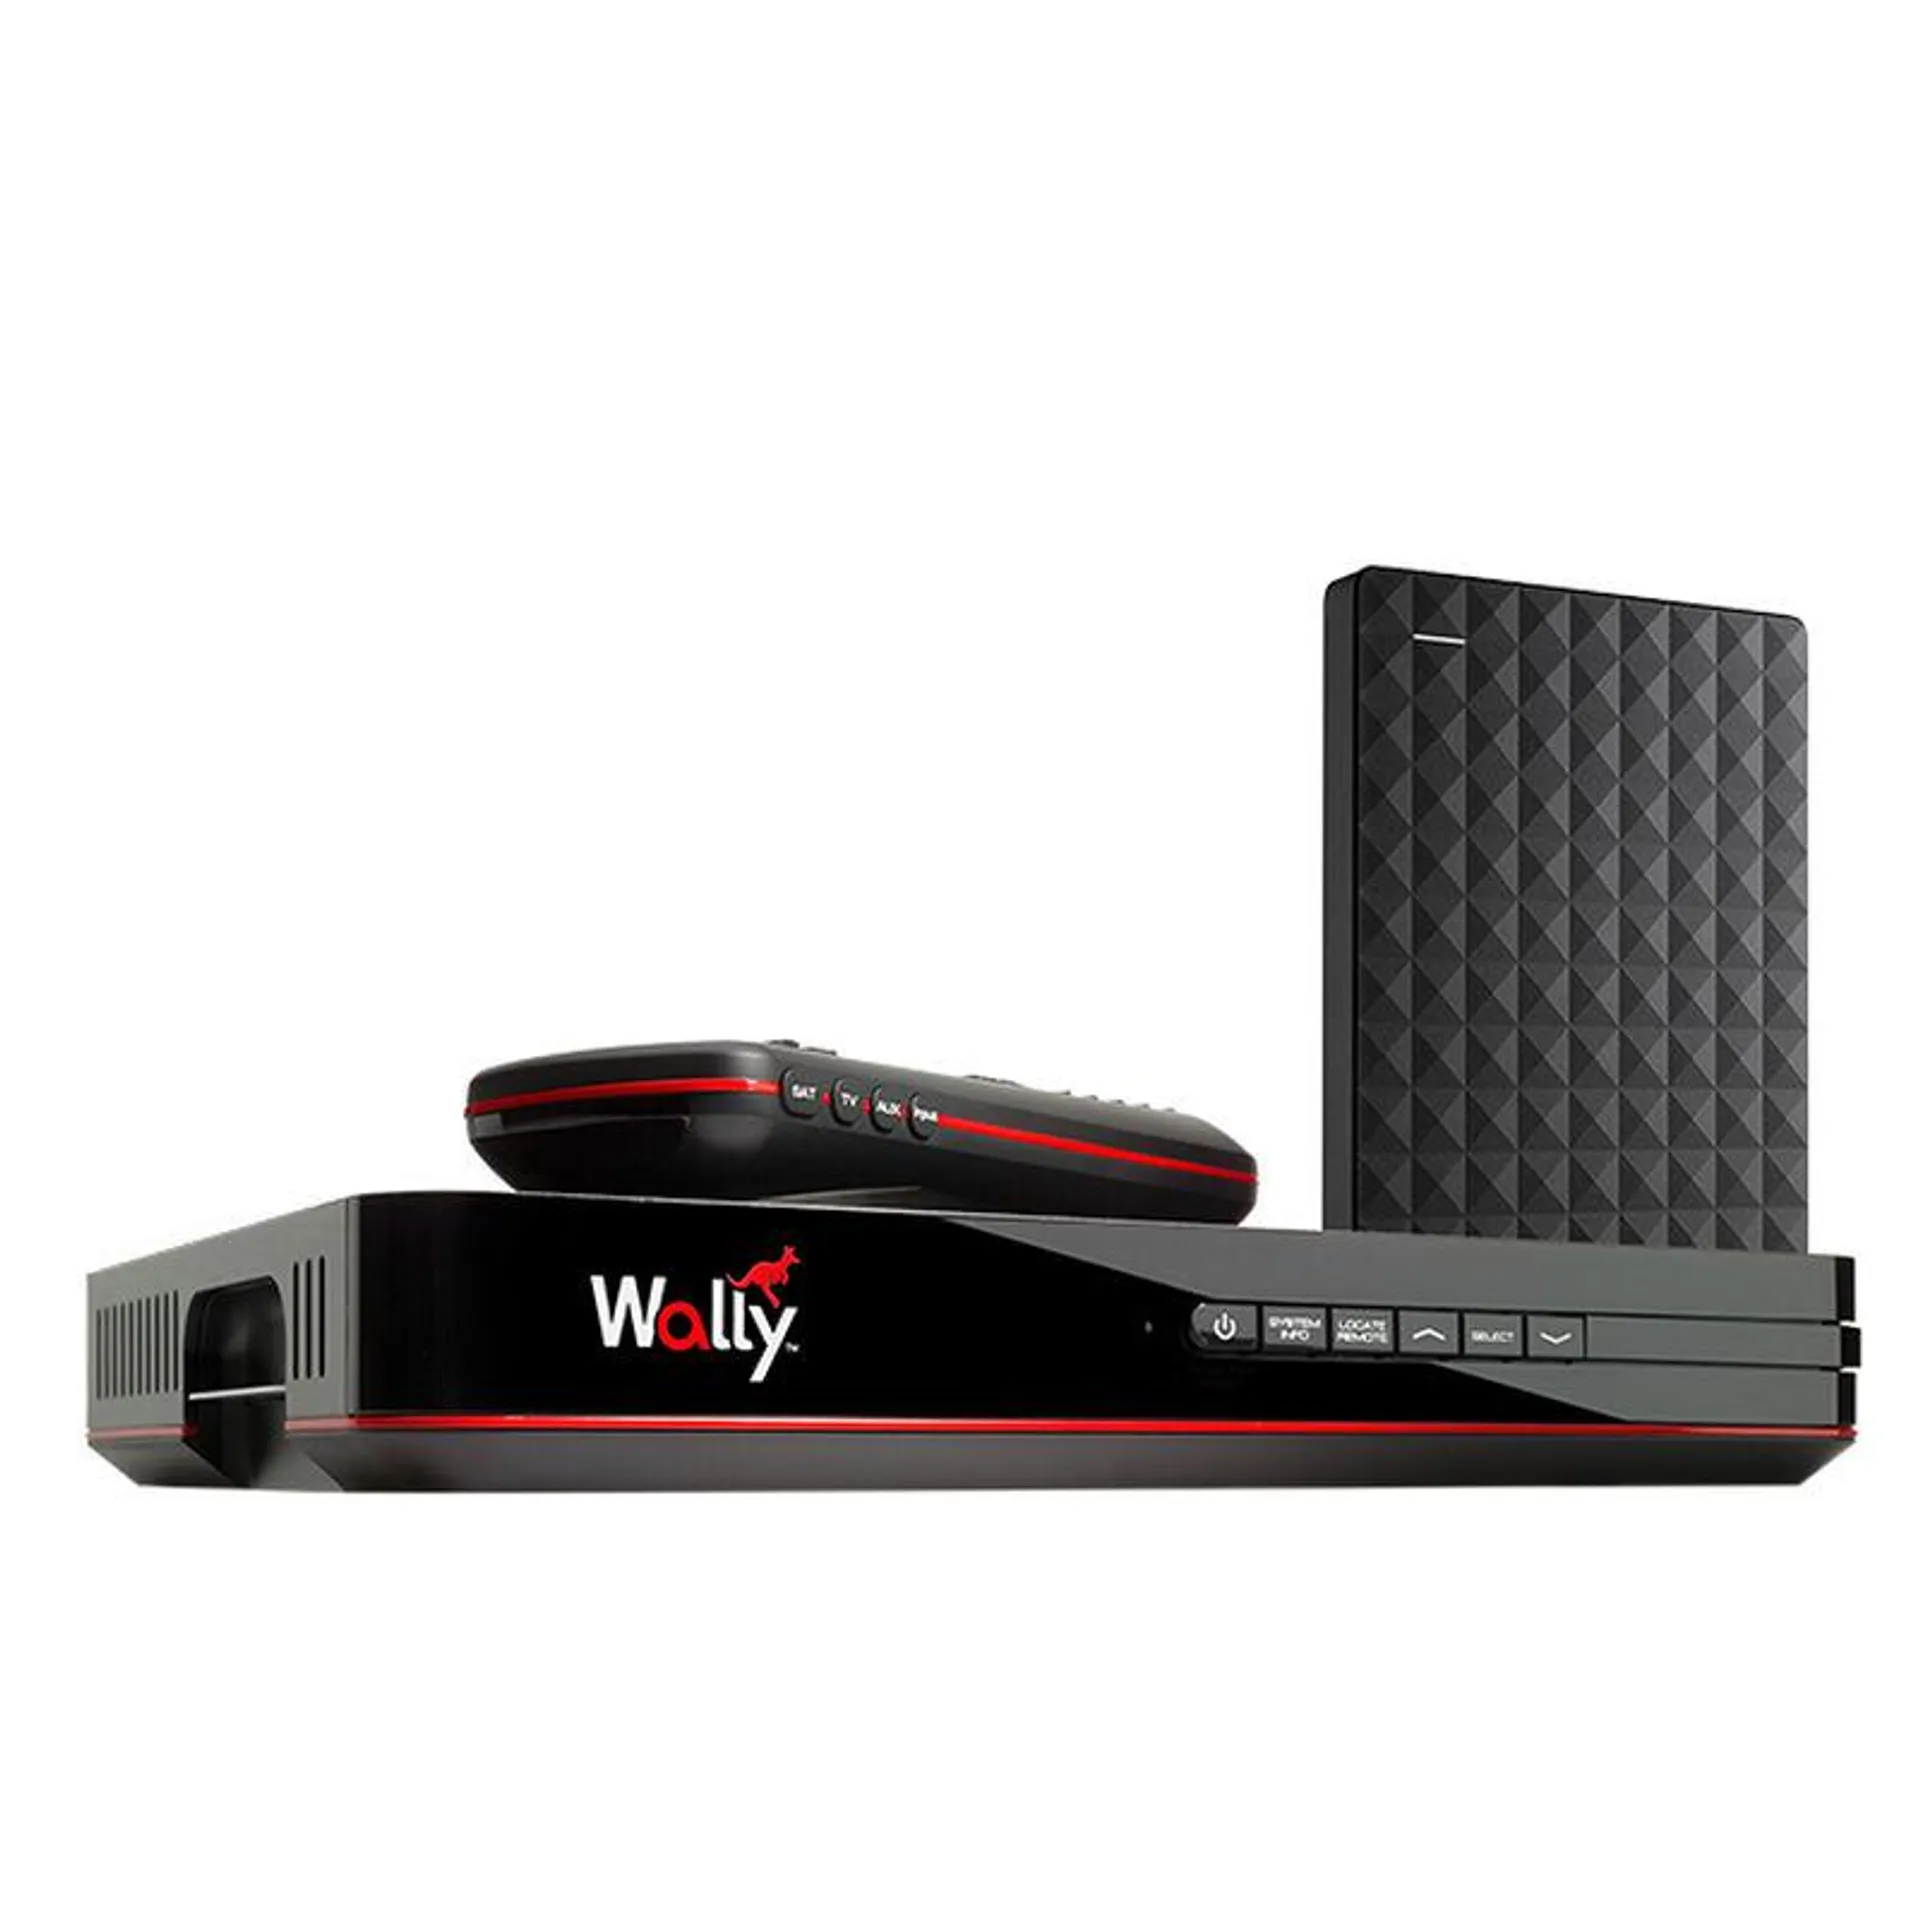 DISH Wally HD Satellite Receiver with DVR Upgrade Expansion Bundle